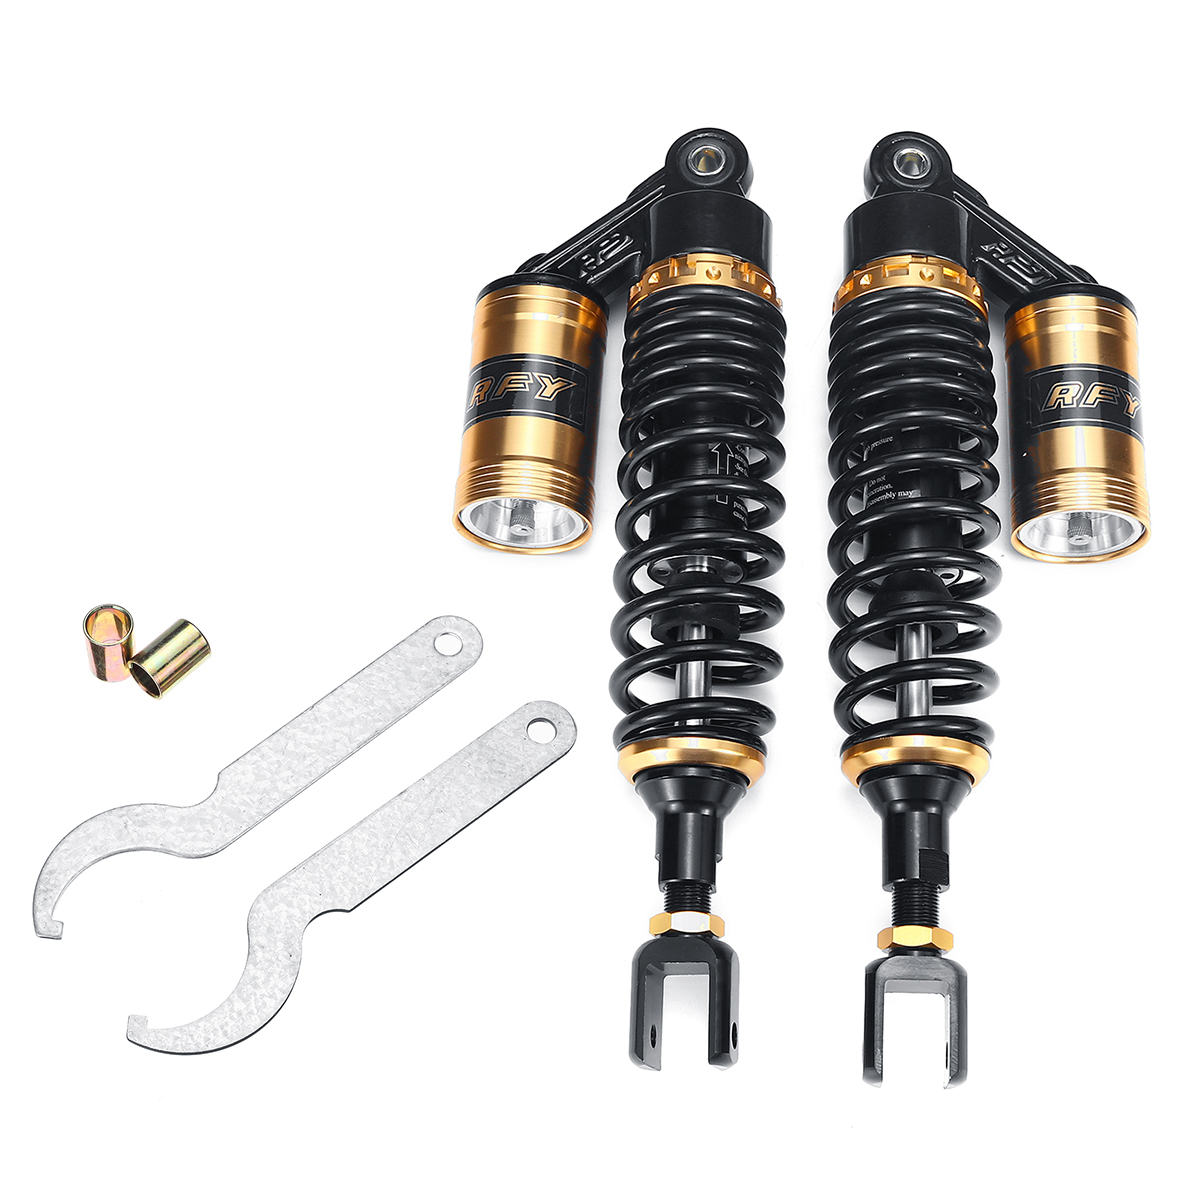 

14inch 360mm Motorcycle Rear Air Shock Absorber Suspension 150cc-750cc For Honda/Yamaha/Suzuki Scooter Quad Street Bikes